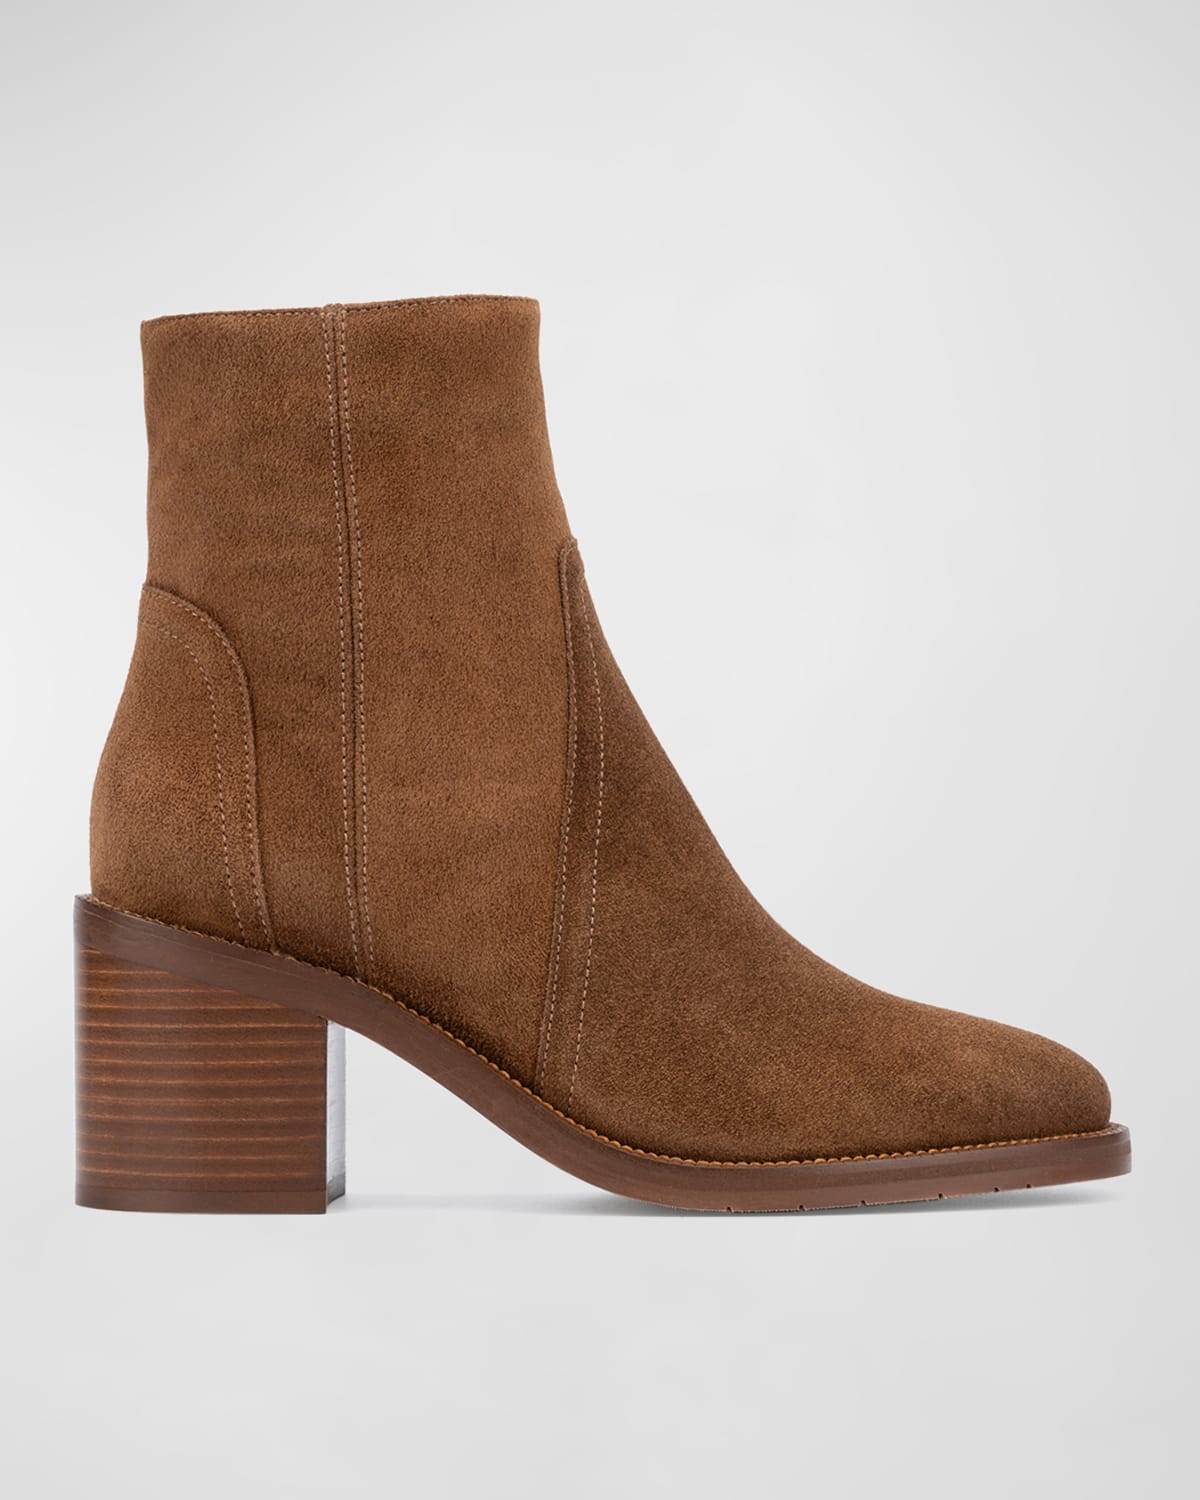 Janella Suede Ankle Boots